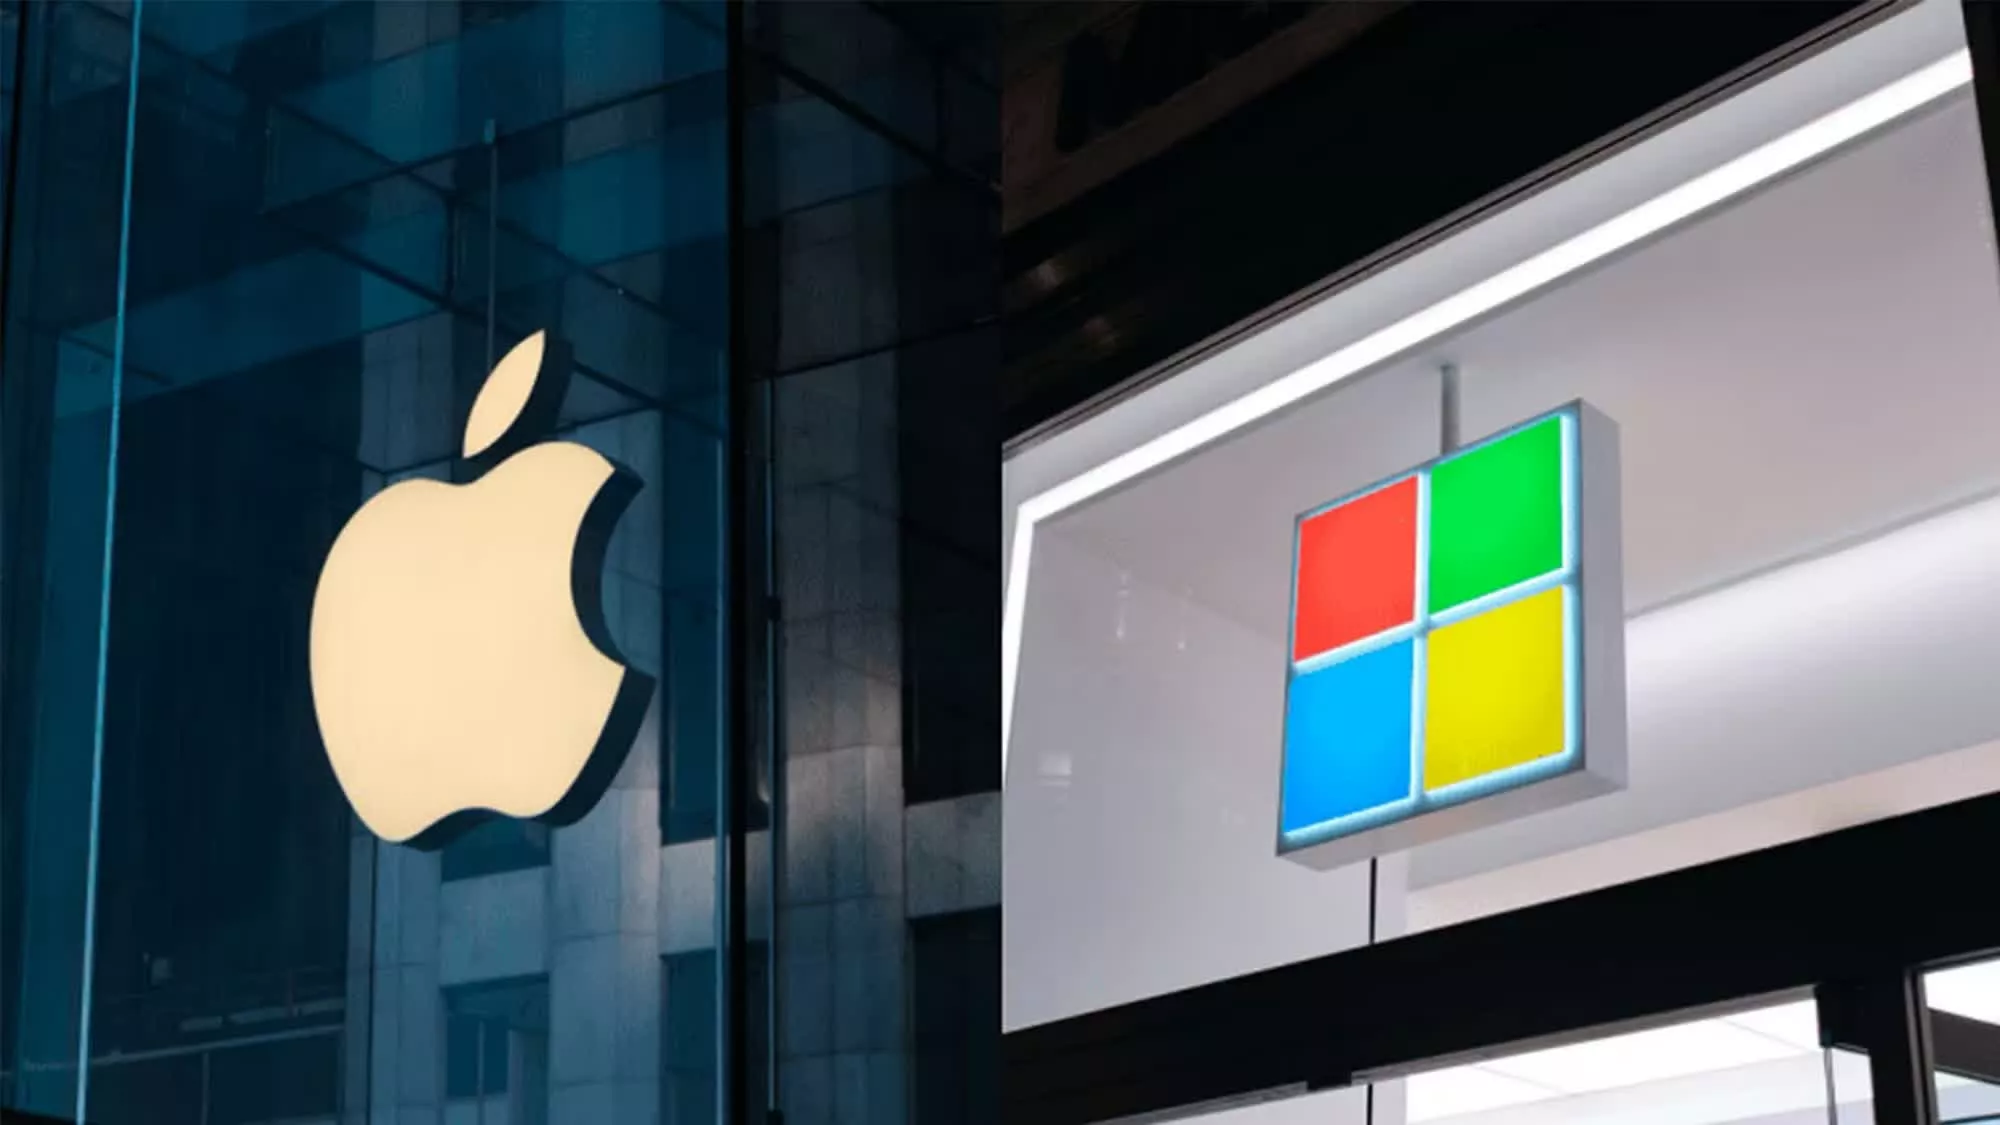 Microsoft briefly dethroned Apple as the world's most valuable company